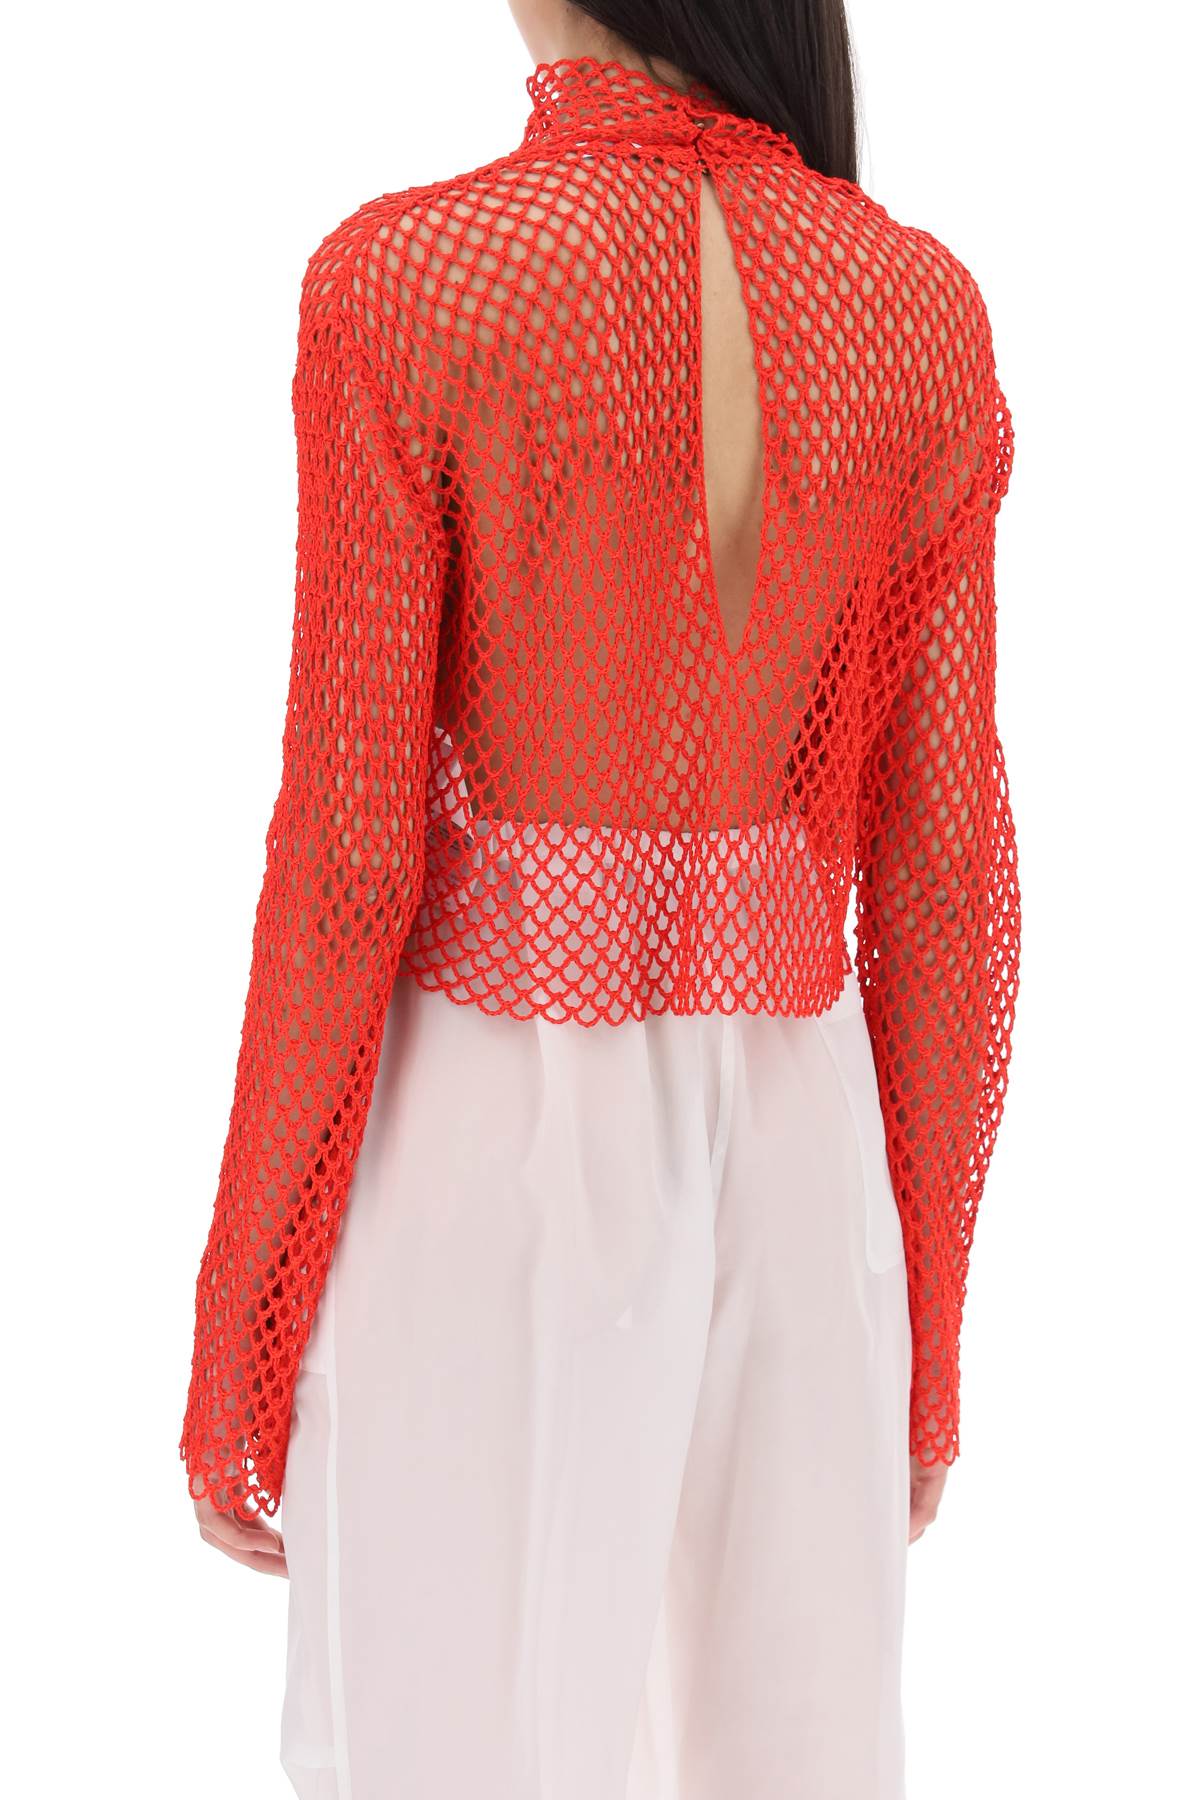 FERRAGAMO Red Fishnet Knit Stand Collar Top for Women - FW23